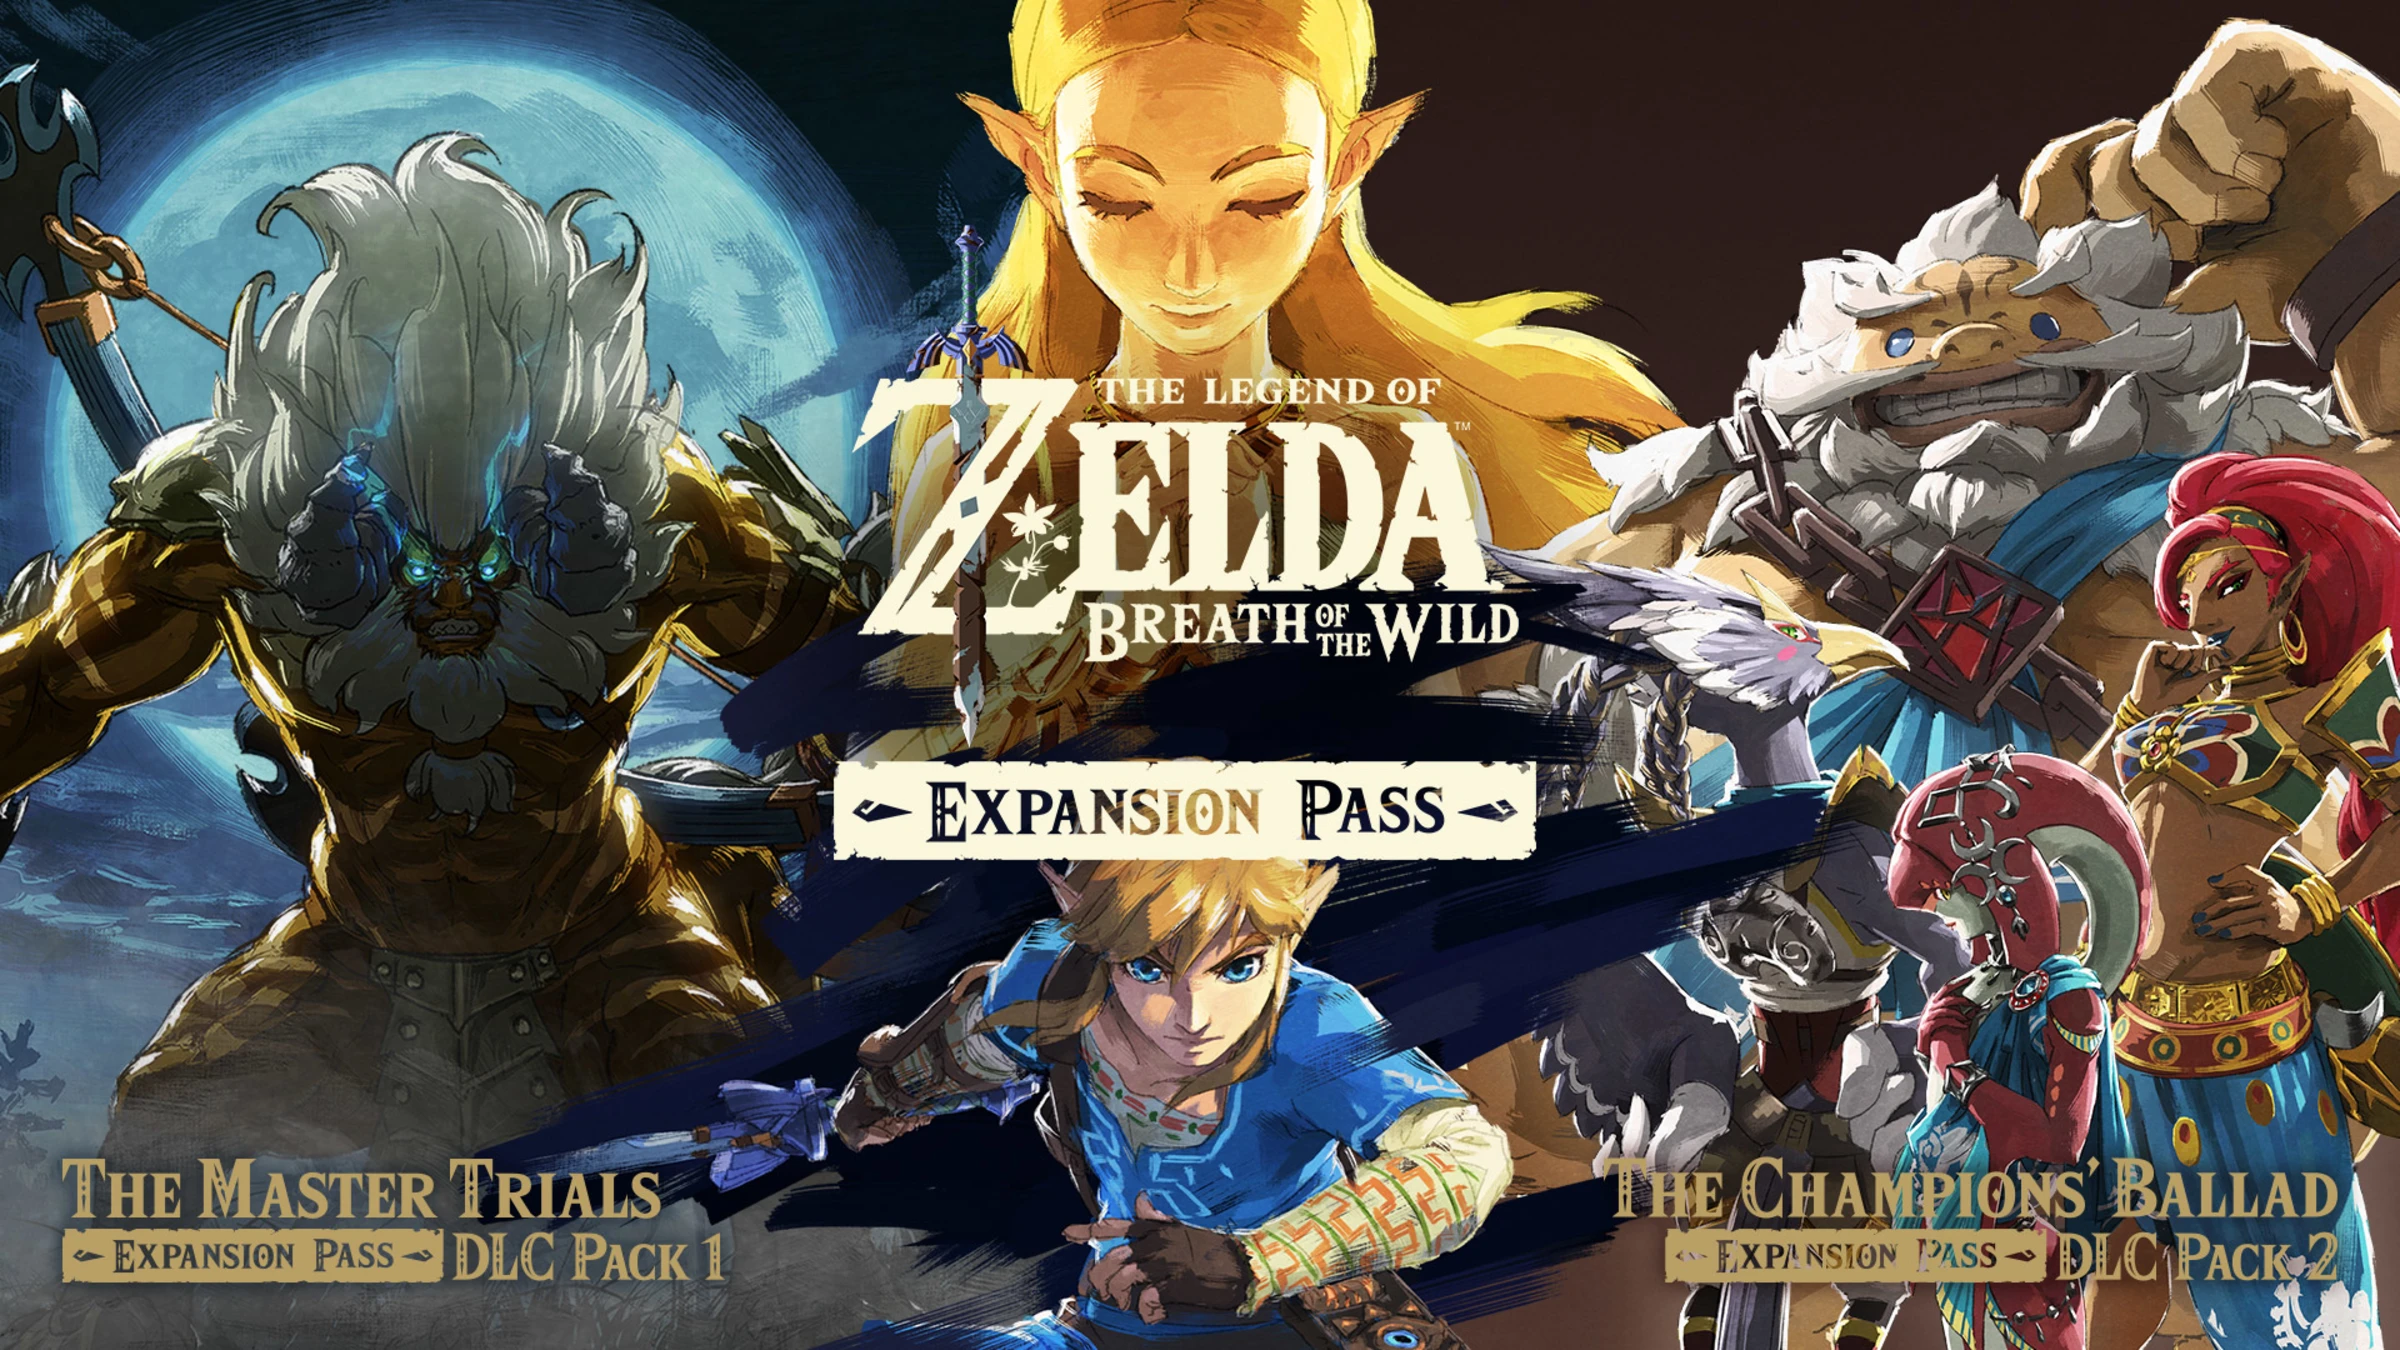 Breath Of The Wild  DLC Pack 2 (concept) 